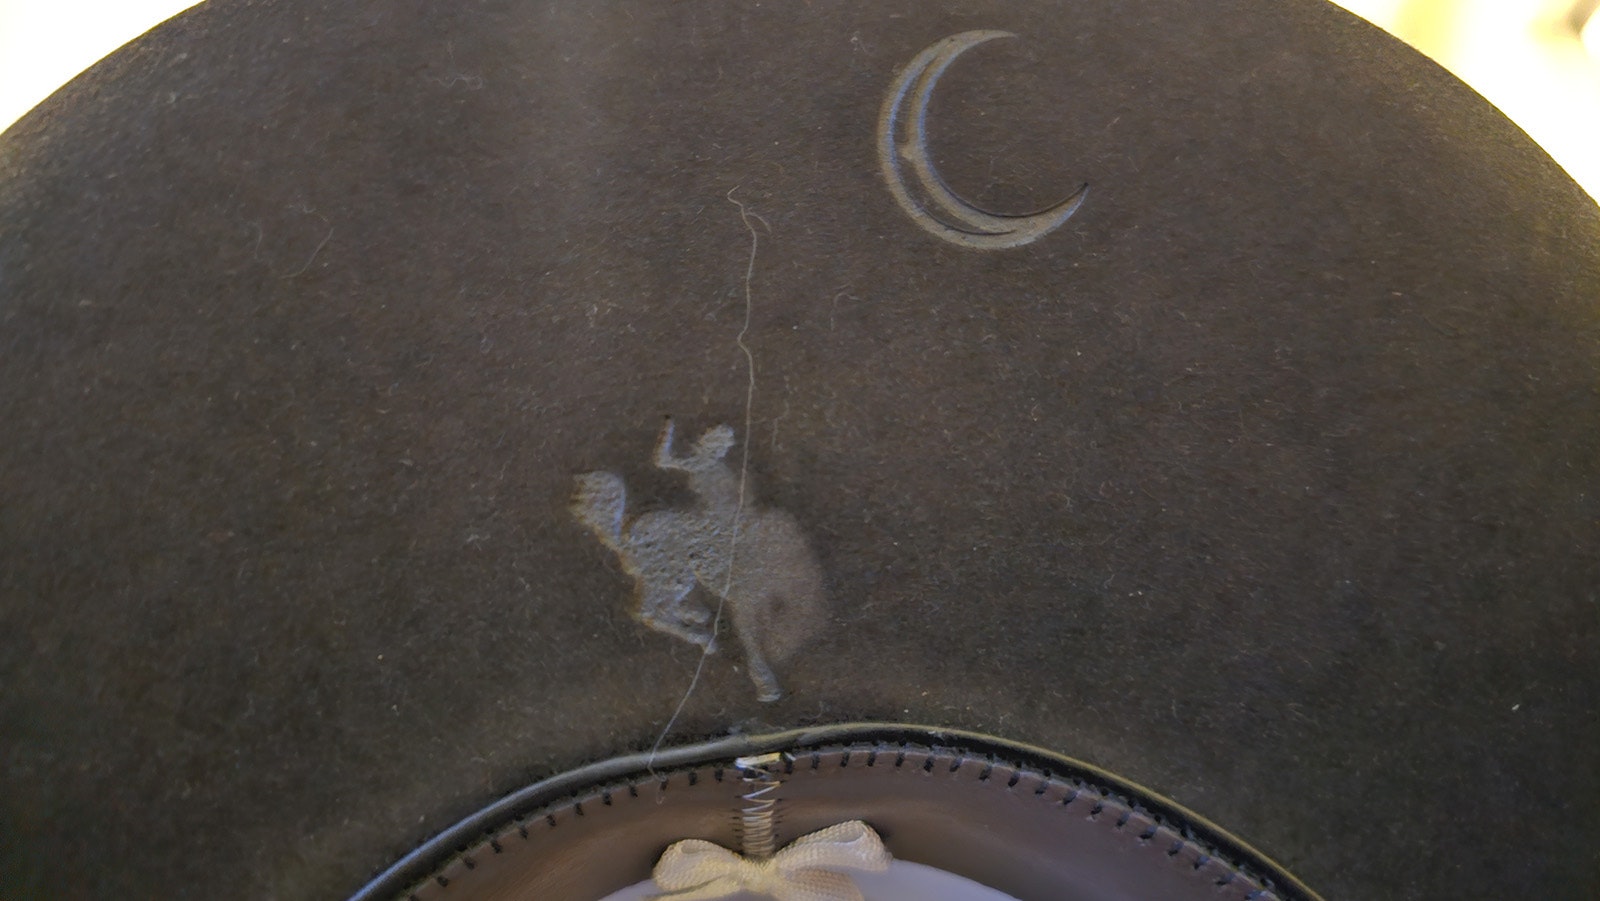 Brands can be added to the underside of the hat like this one that shows the bucking horse dancing under a moon.